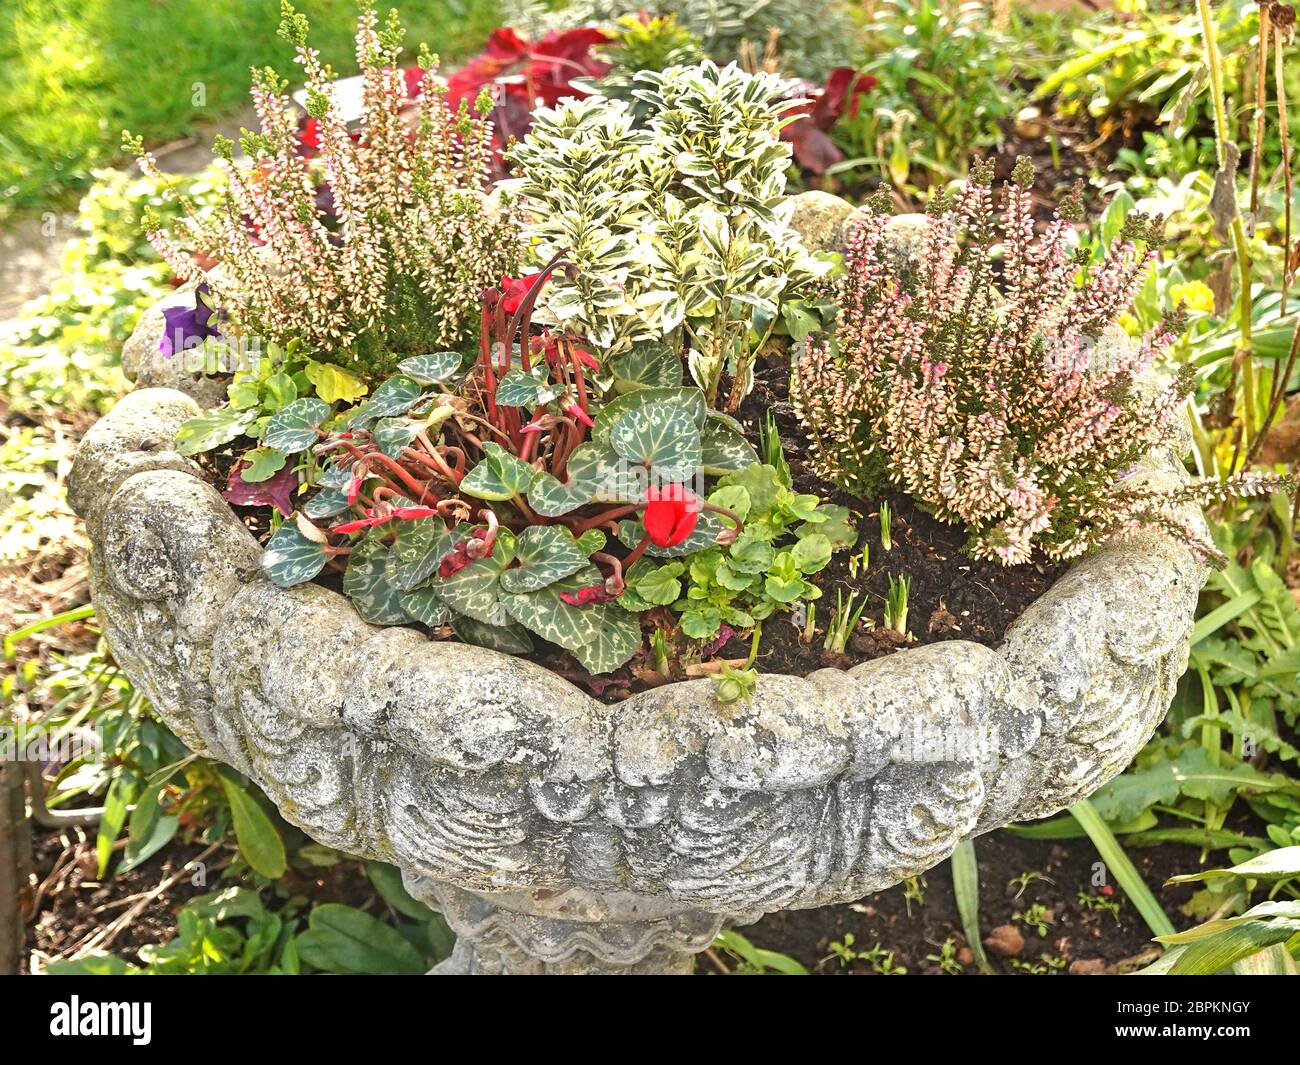 Close up old concrete bird bath adapted to form back garden planter box container for assorted winter heather cyclamen pansies plants Essex England UK Stock Photo